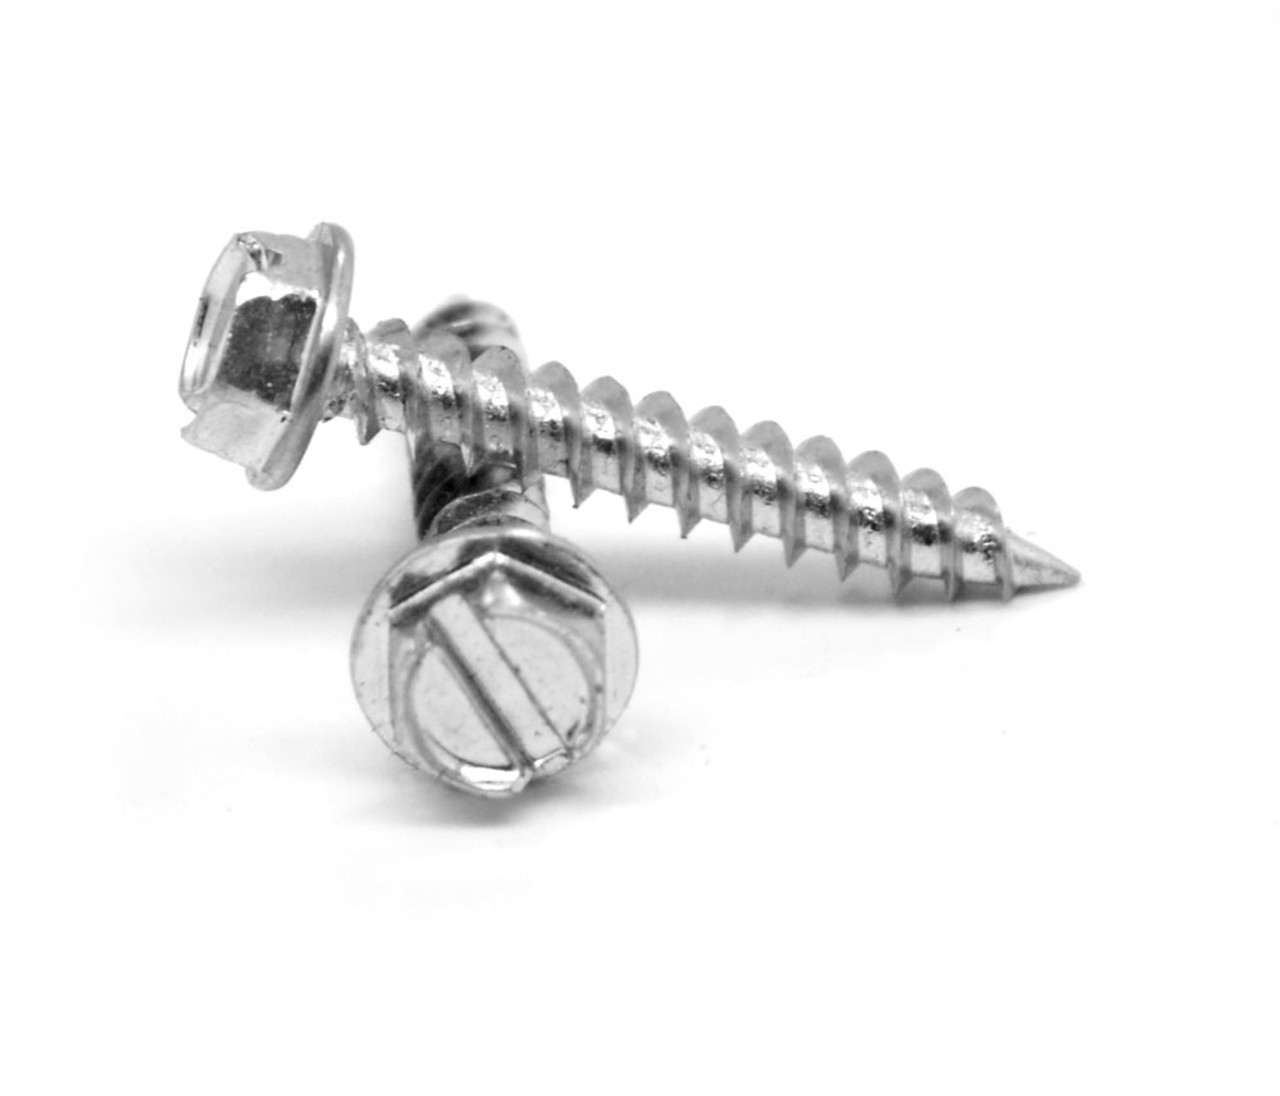 #8-15 x 2 1/2" (FT) 1/4" AF Self-Piercing Sheet Metal Screw Slotted Hex Washer Head Low Carbon Steel Zinc Plated